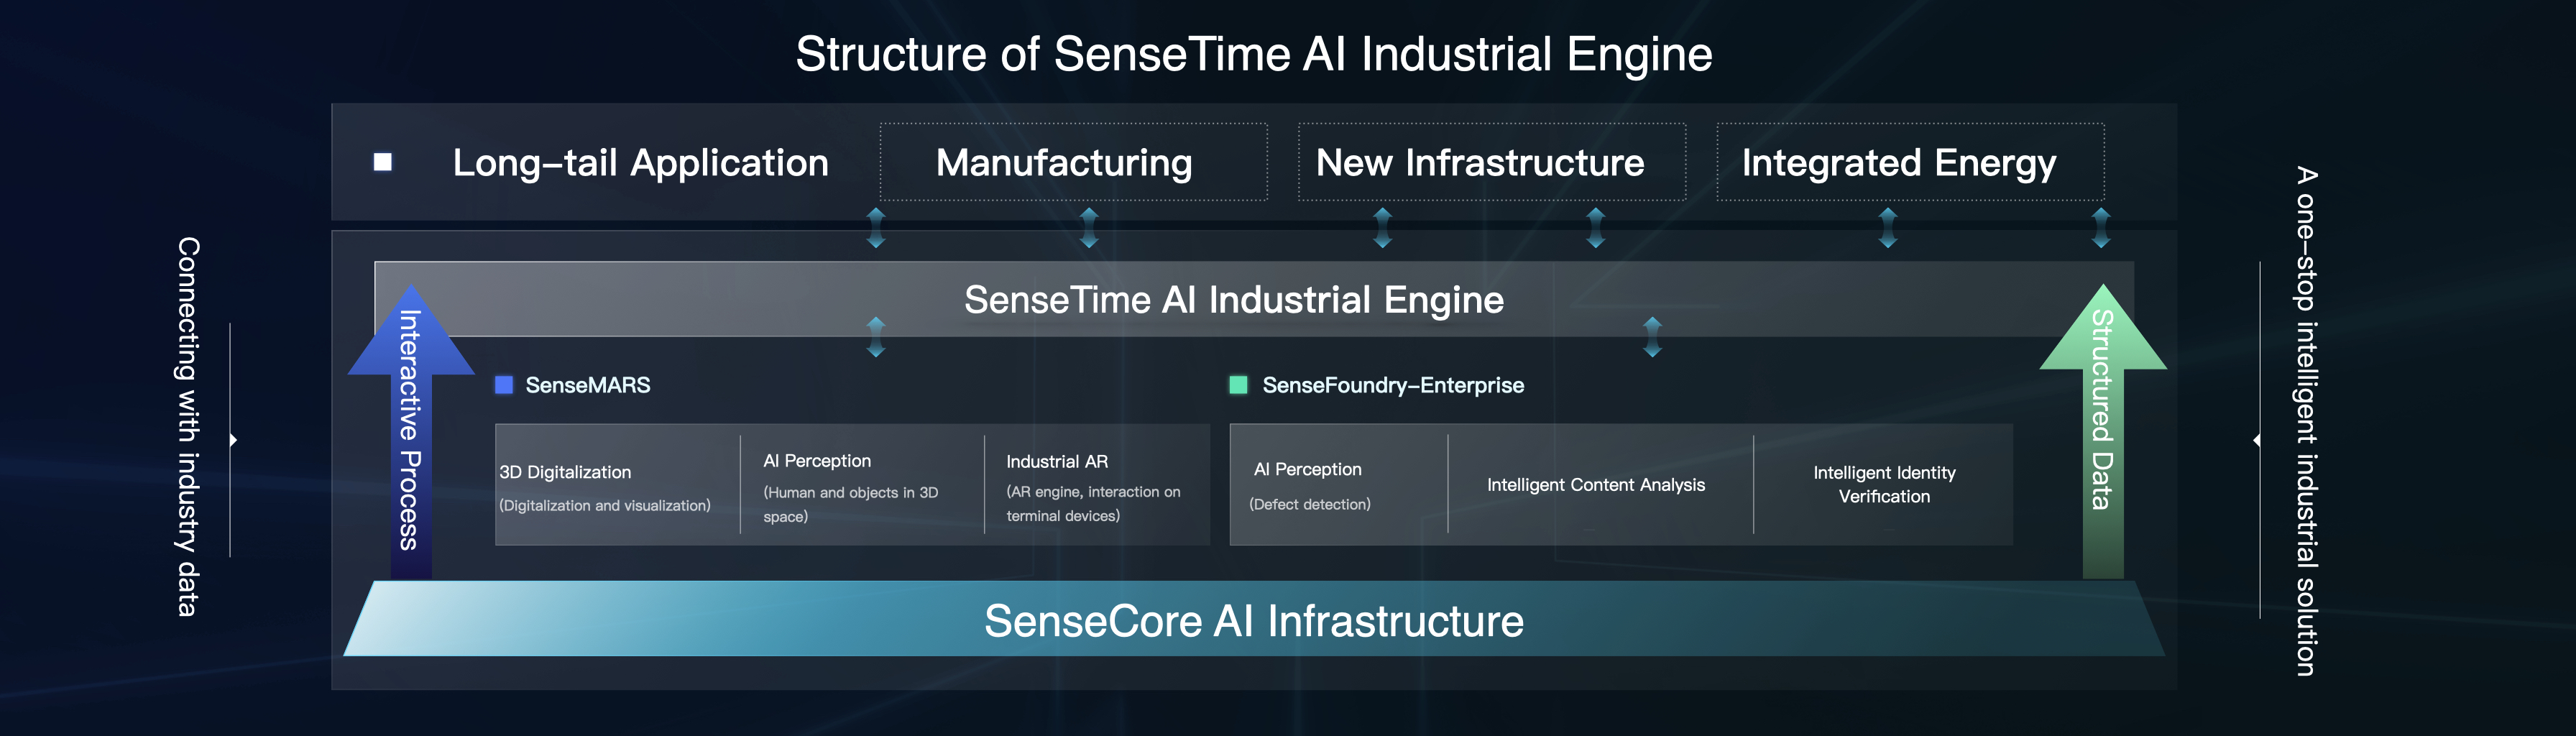 Structure of SenseTime AI Industrial Engine .jpg